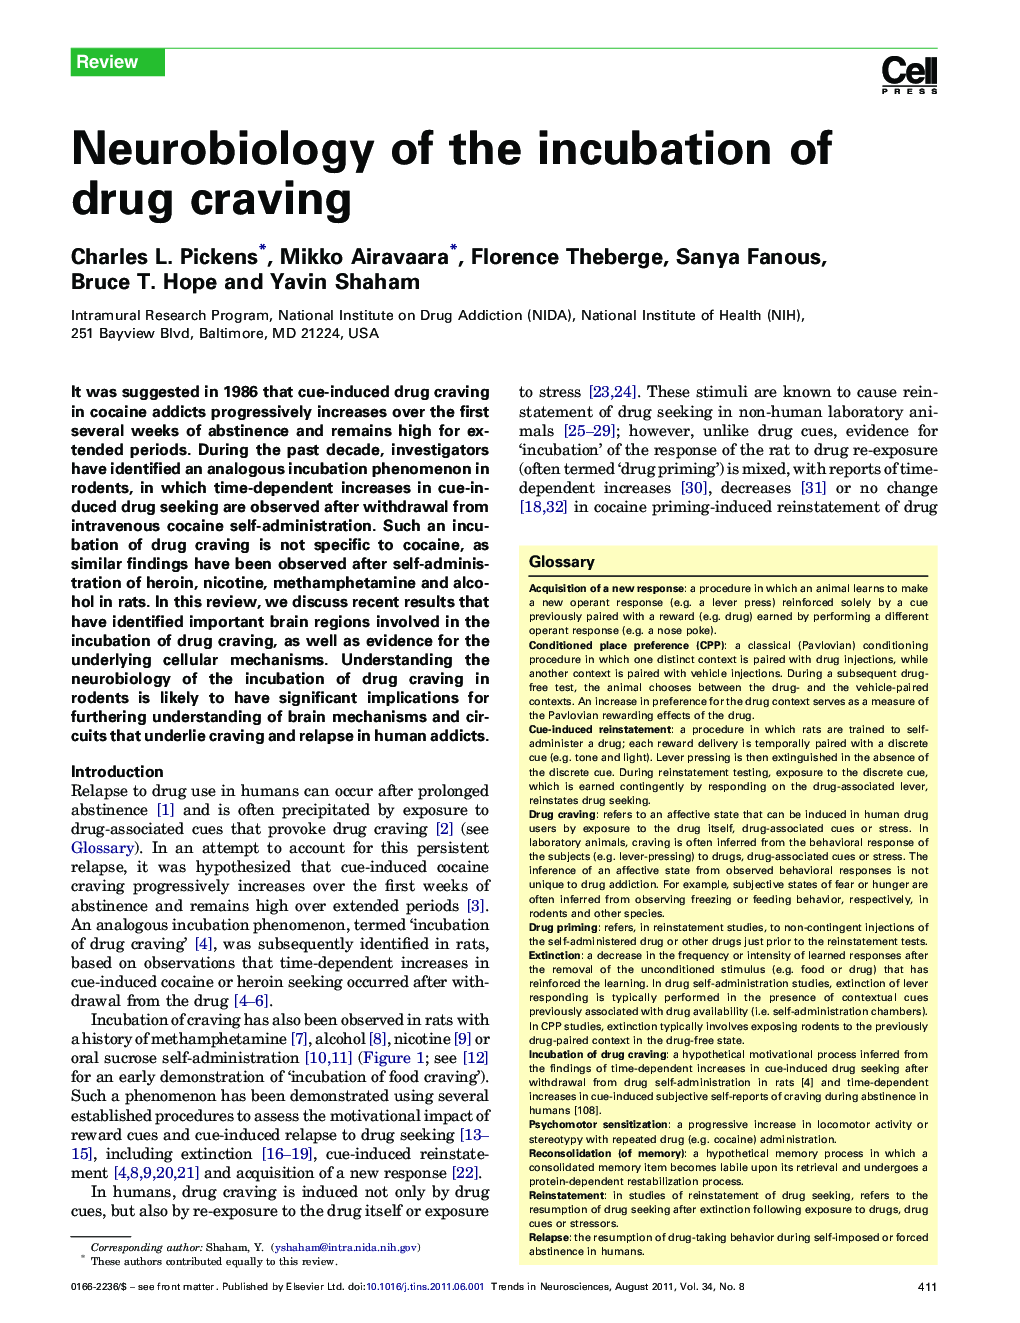 Neurobiology of the incubation of drug craving